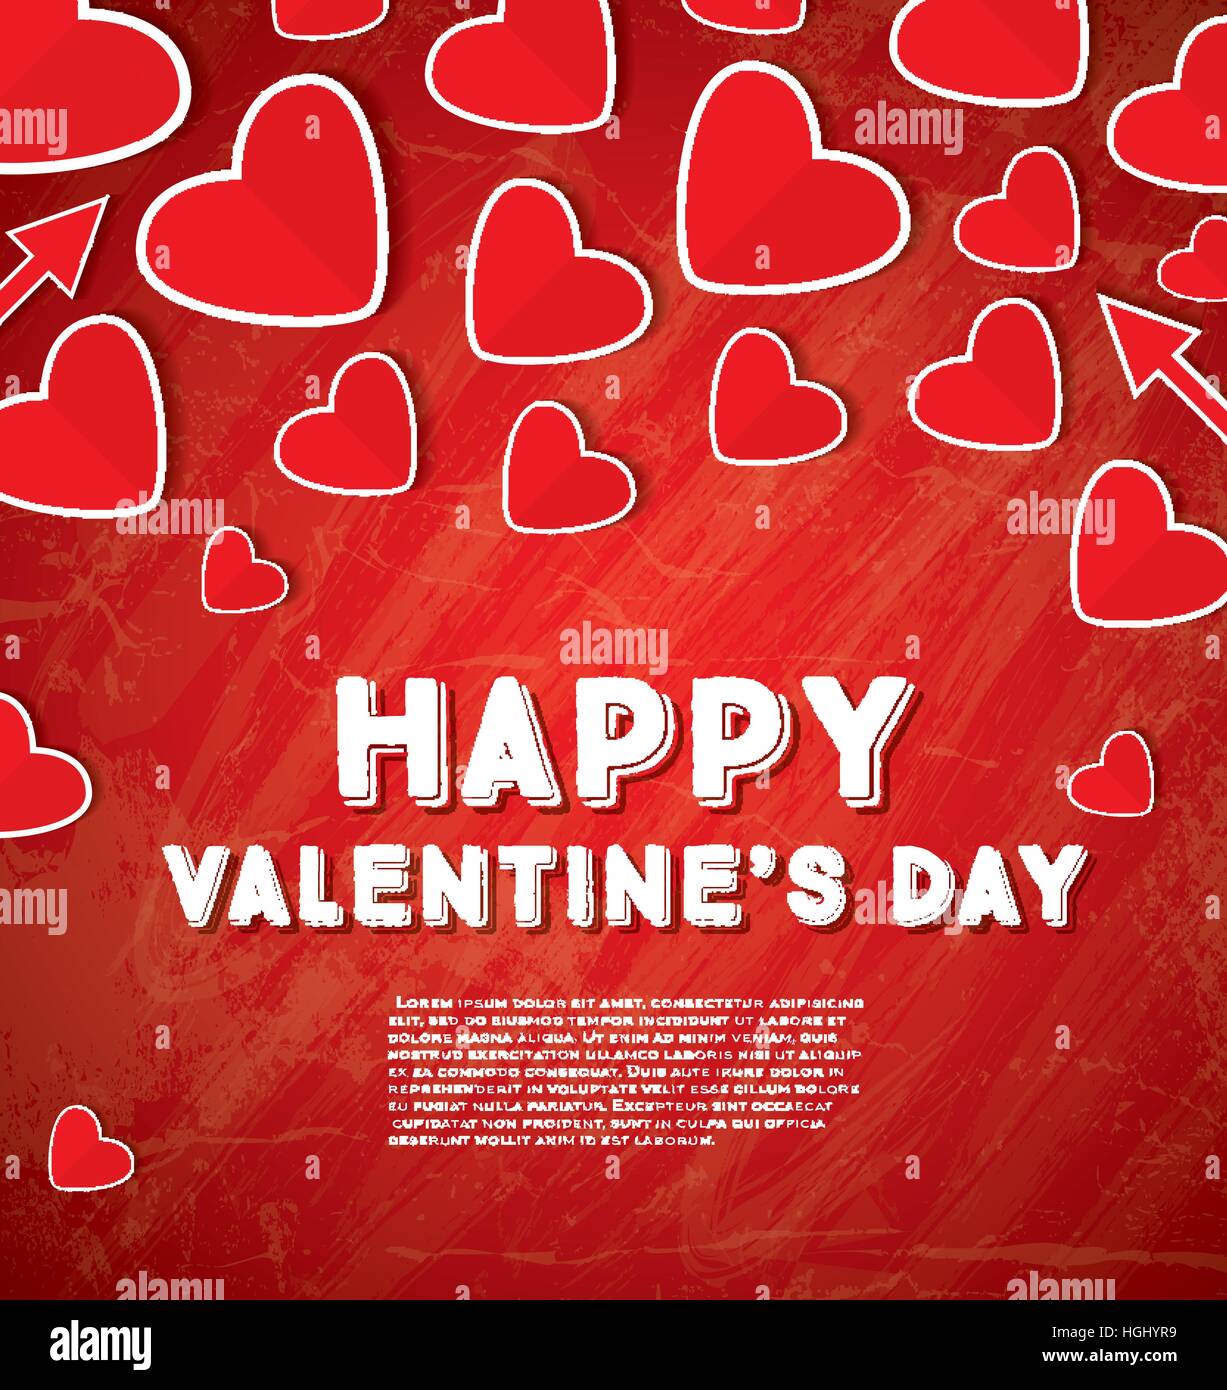 Dia Dos Namorados Vector Hd PNG Images, Dia Dos Namorados Greeting Card  With Text And Hearts, Valentine, Happy, Holiday PNG Image For Free Download